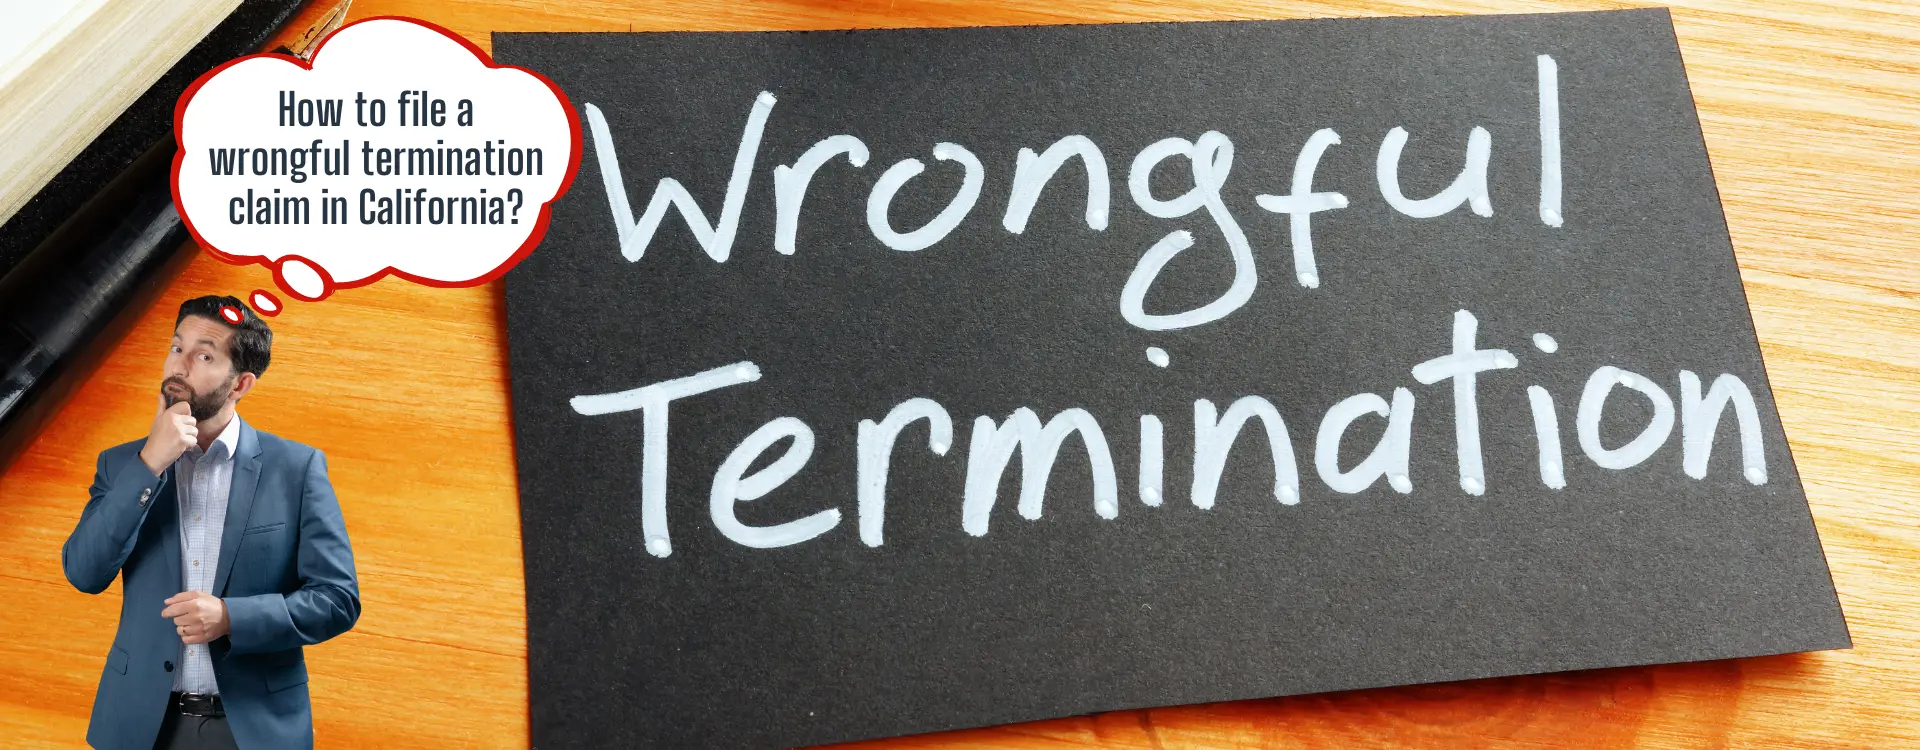 file a wrongful termination claim in california